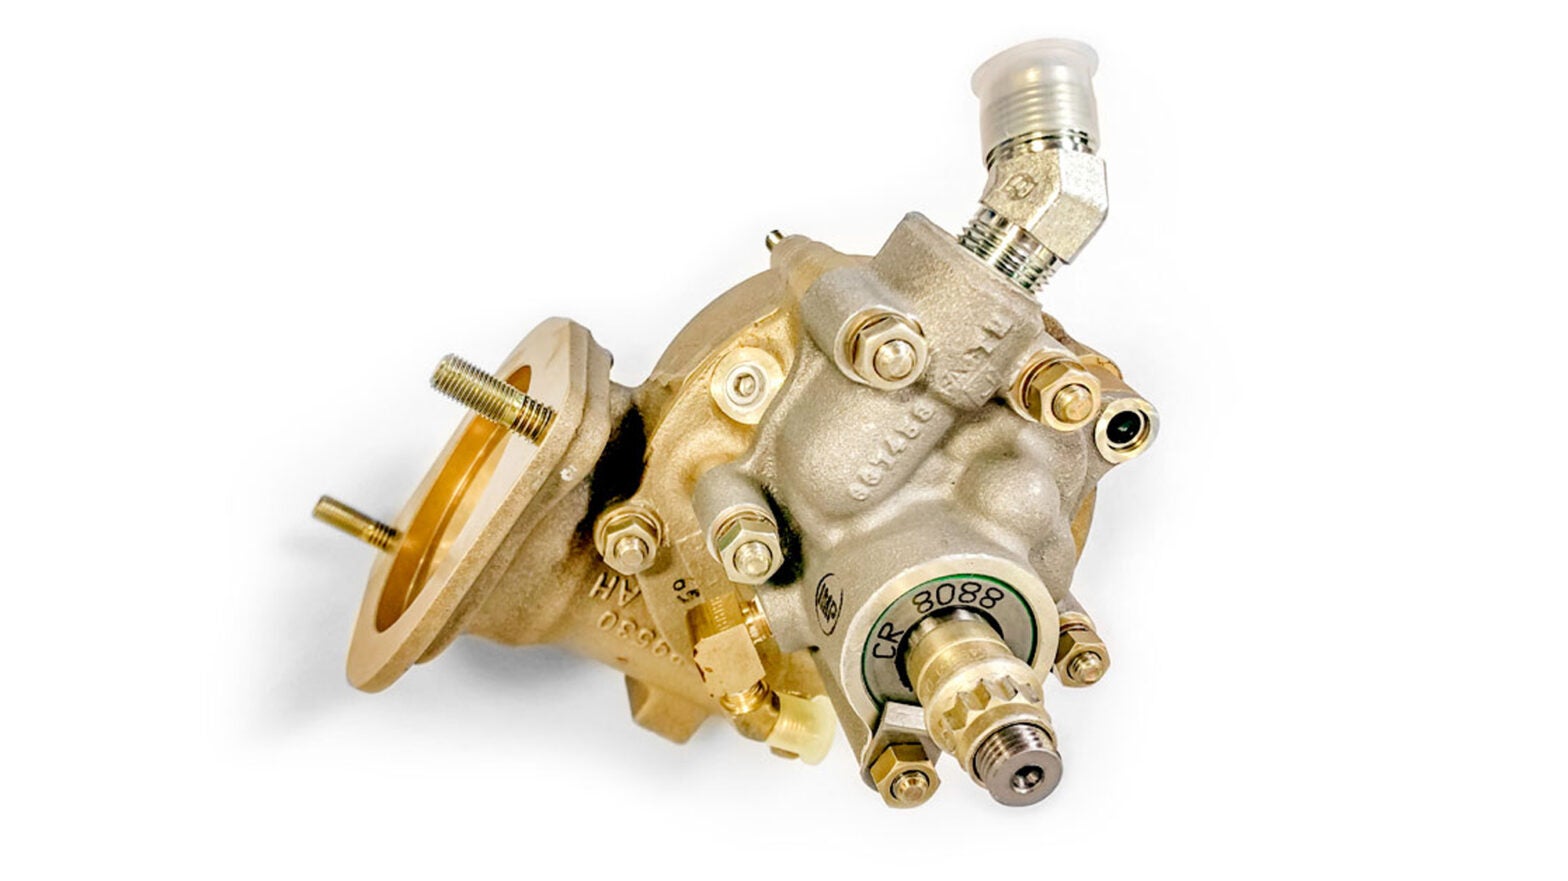 Hartzell To Manufacture Sky-Tec Starter Products